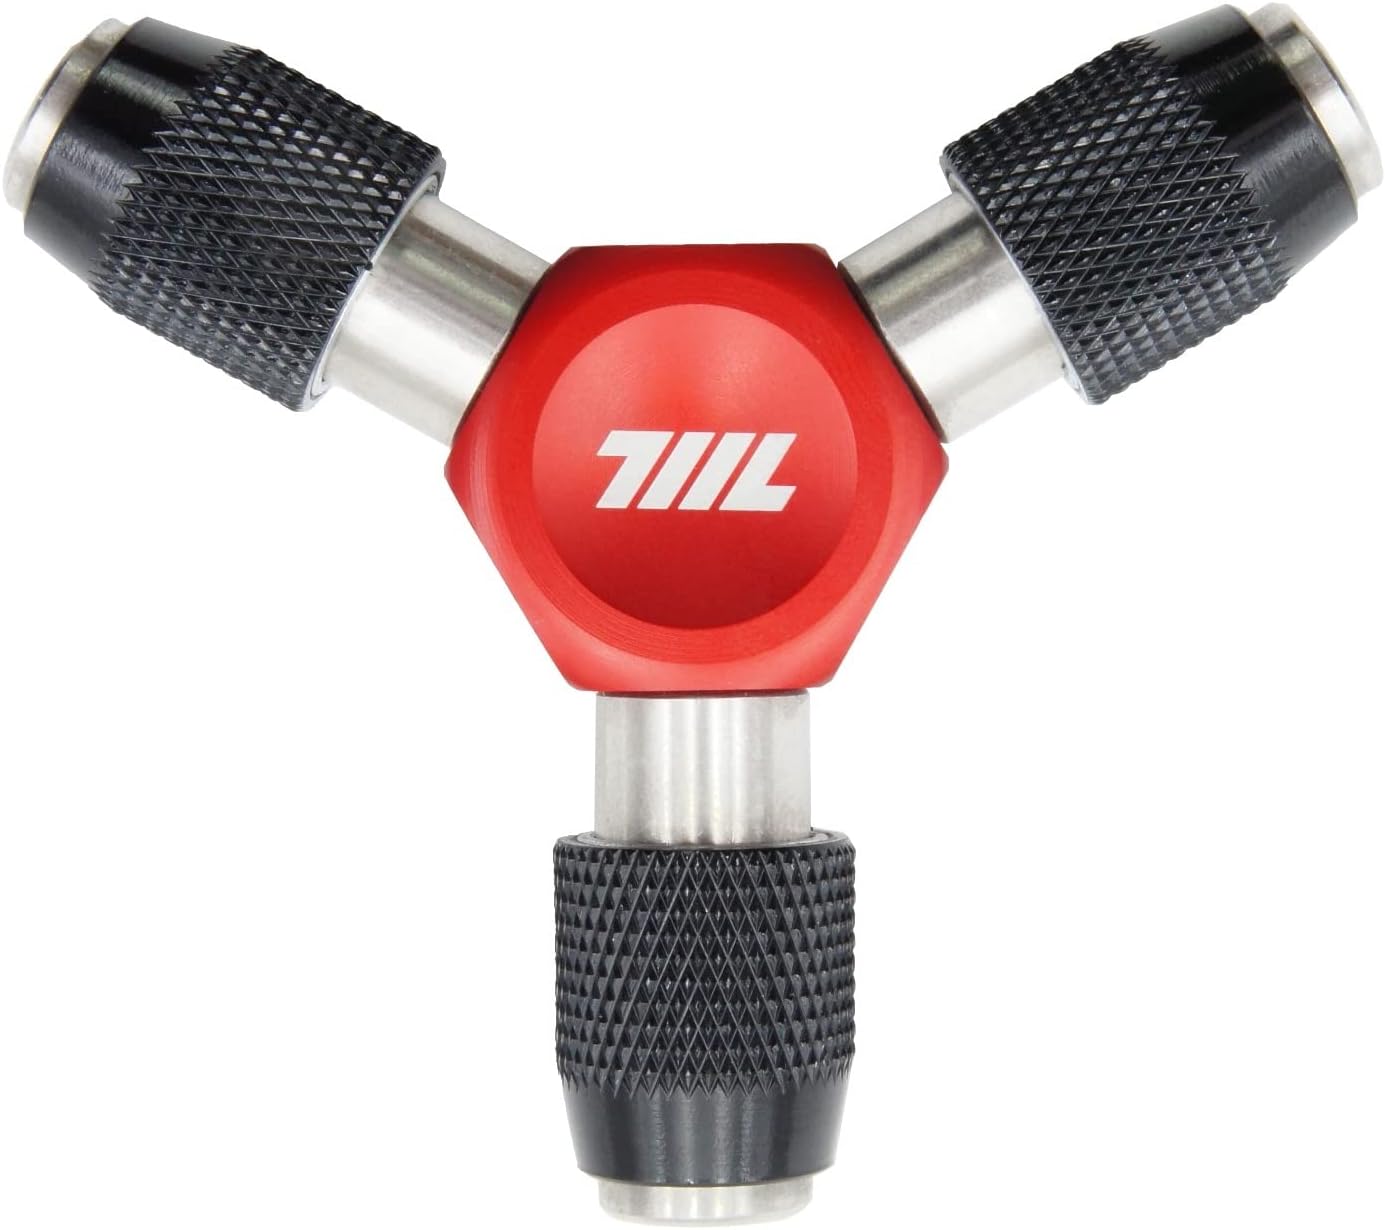 711L EDC Y Driver I Three Way 1/4" Hex Bit Driver I Y Type Hex Socket Wrench I Compact Motorcycle Bicycle Bike Tool (RED)